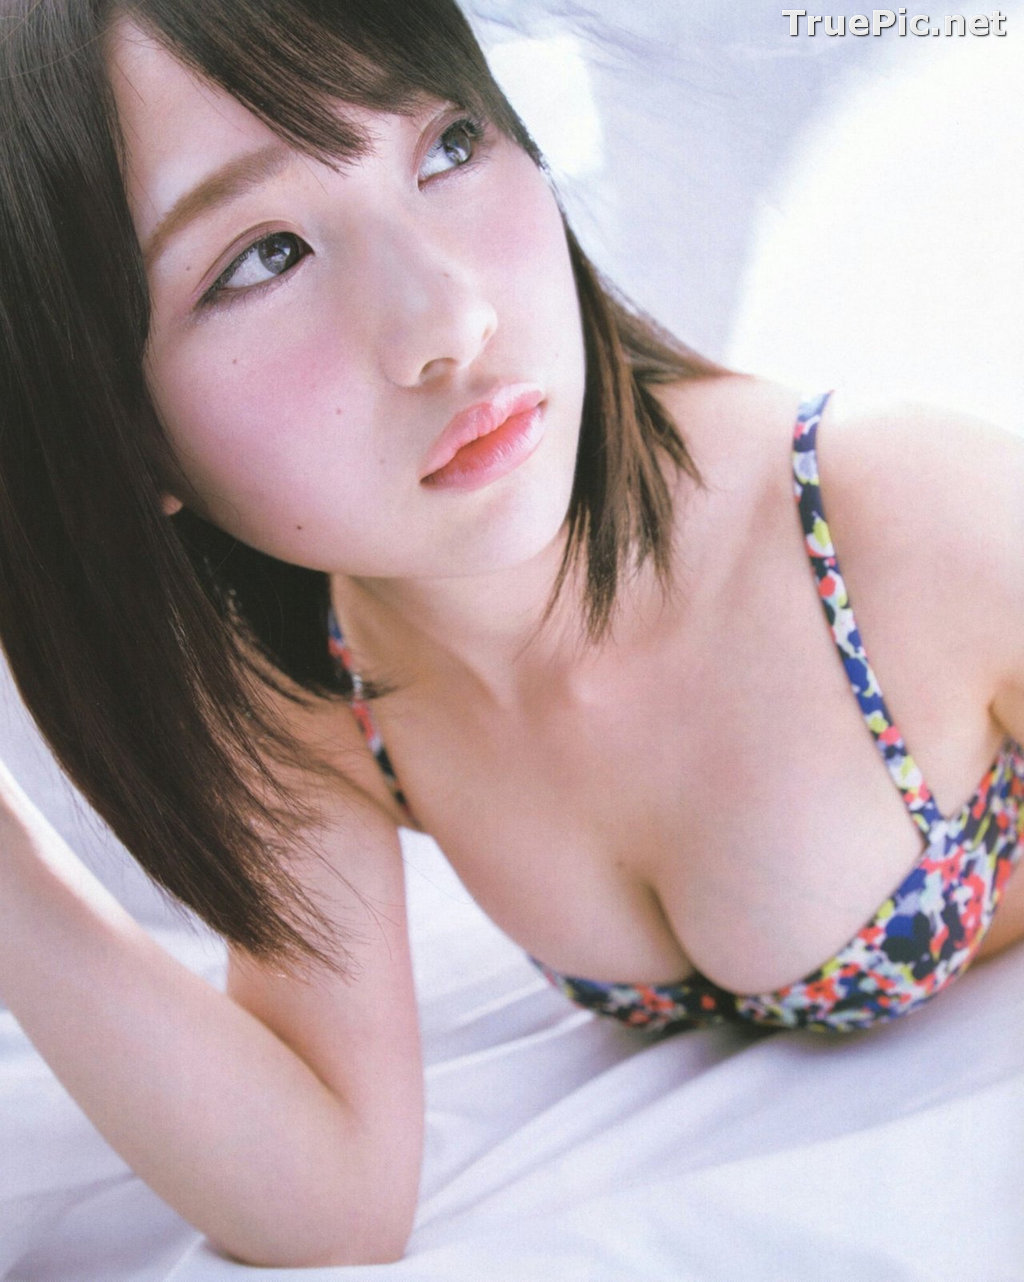 Image Japanese Beauty – Juri Takahashi - Sexy Picture Collection 2020 - TruePic.net - Picture-69